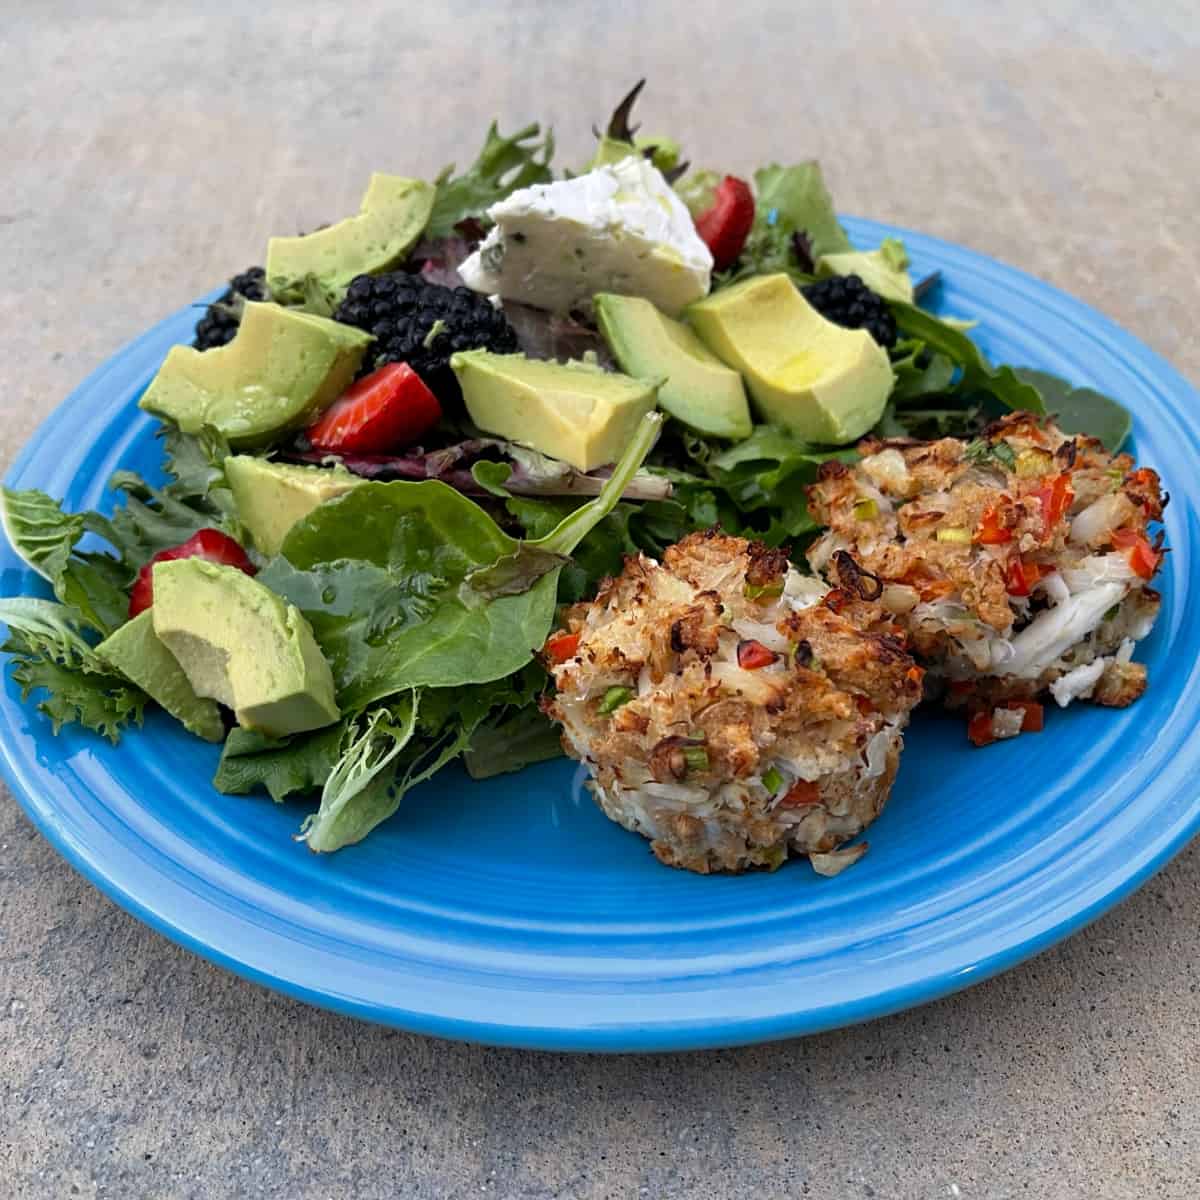 Muffin tin crab cakes with mixed green salad on blue plate.